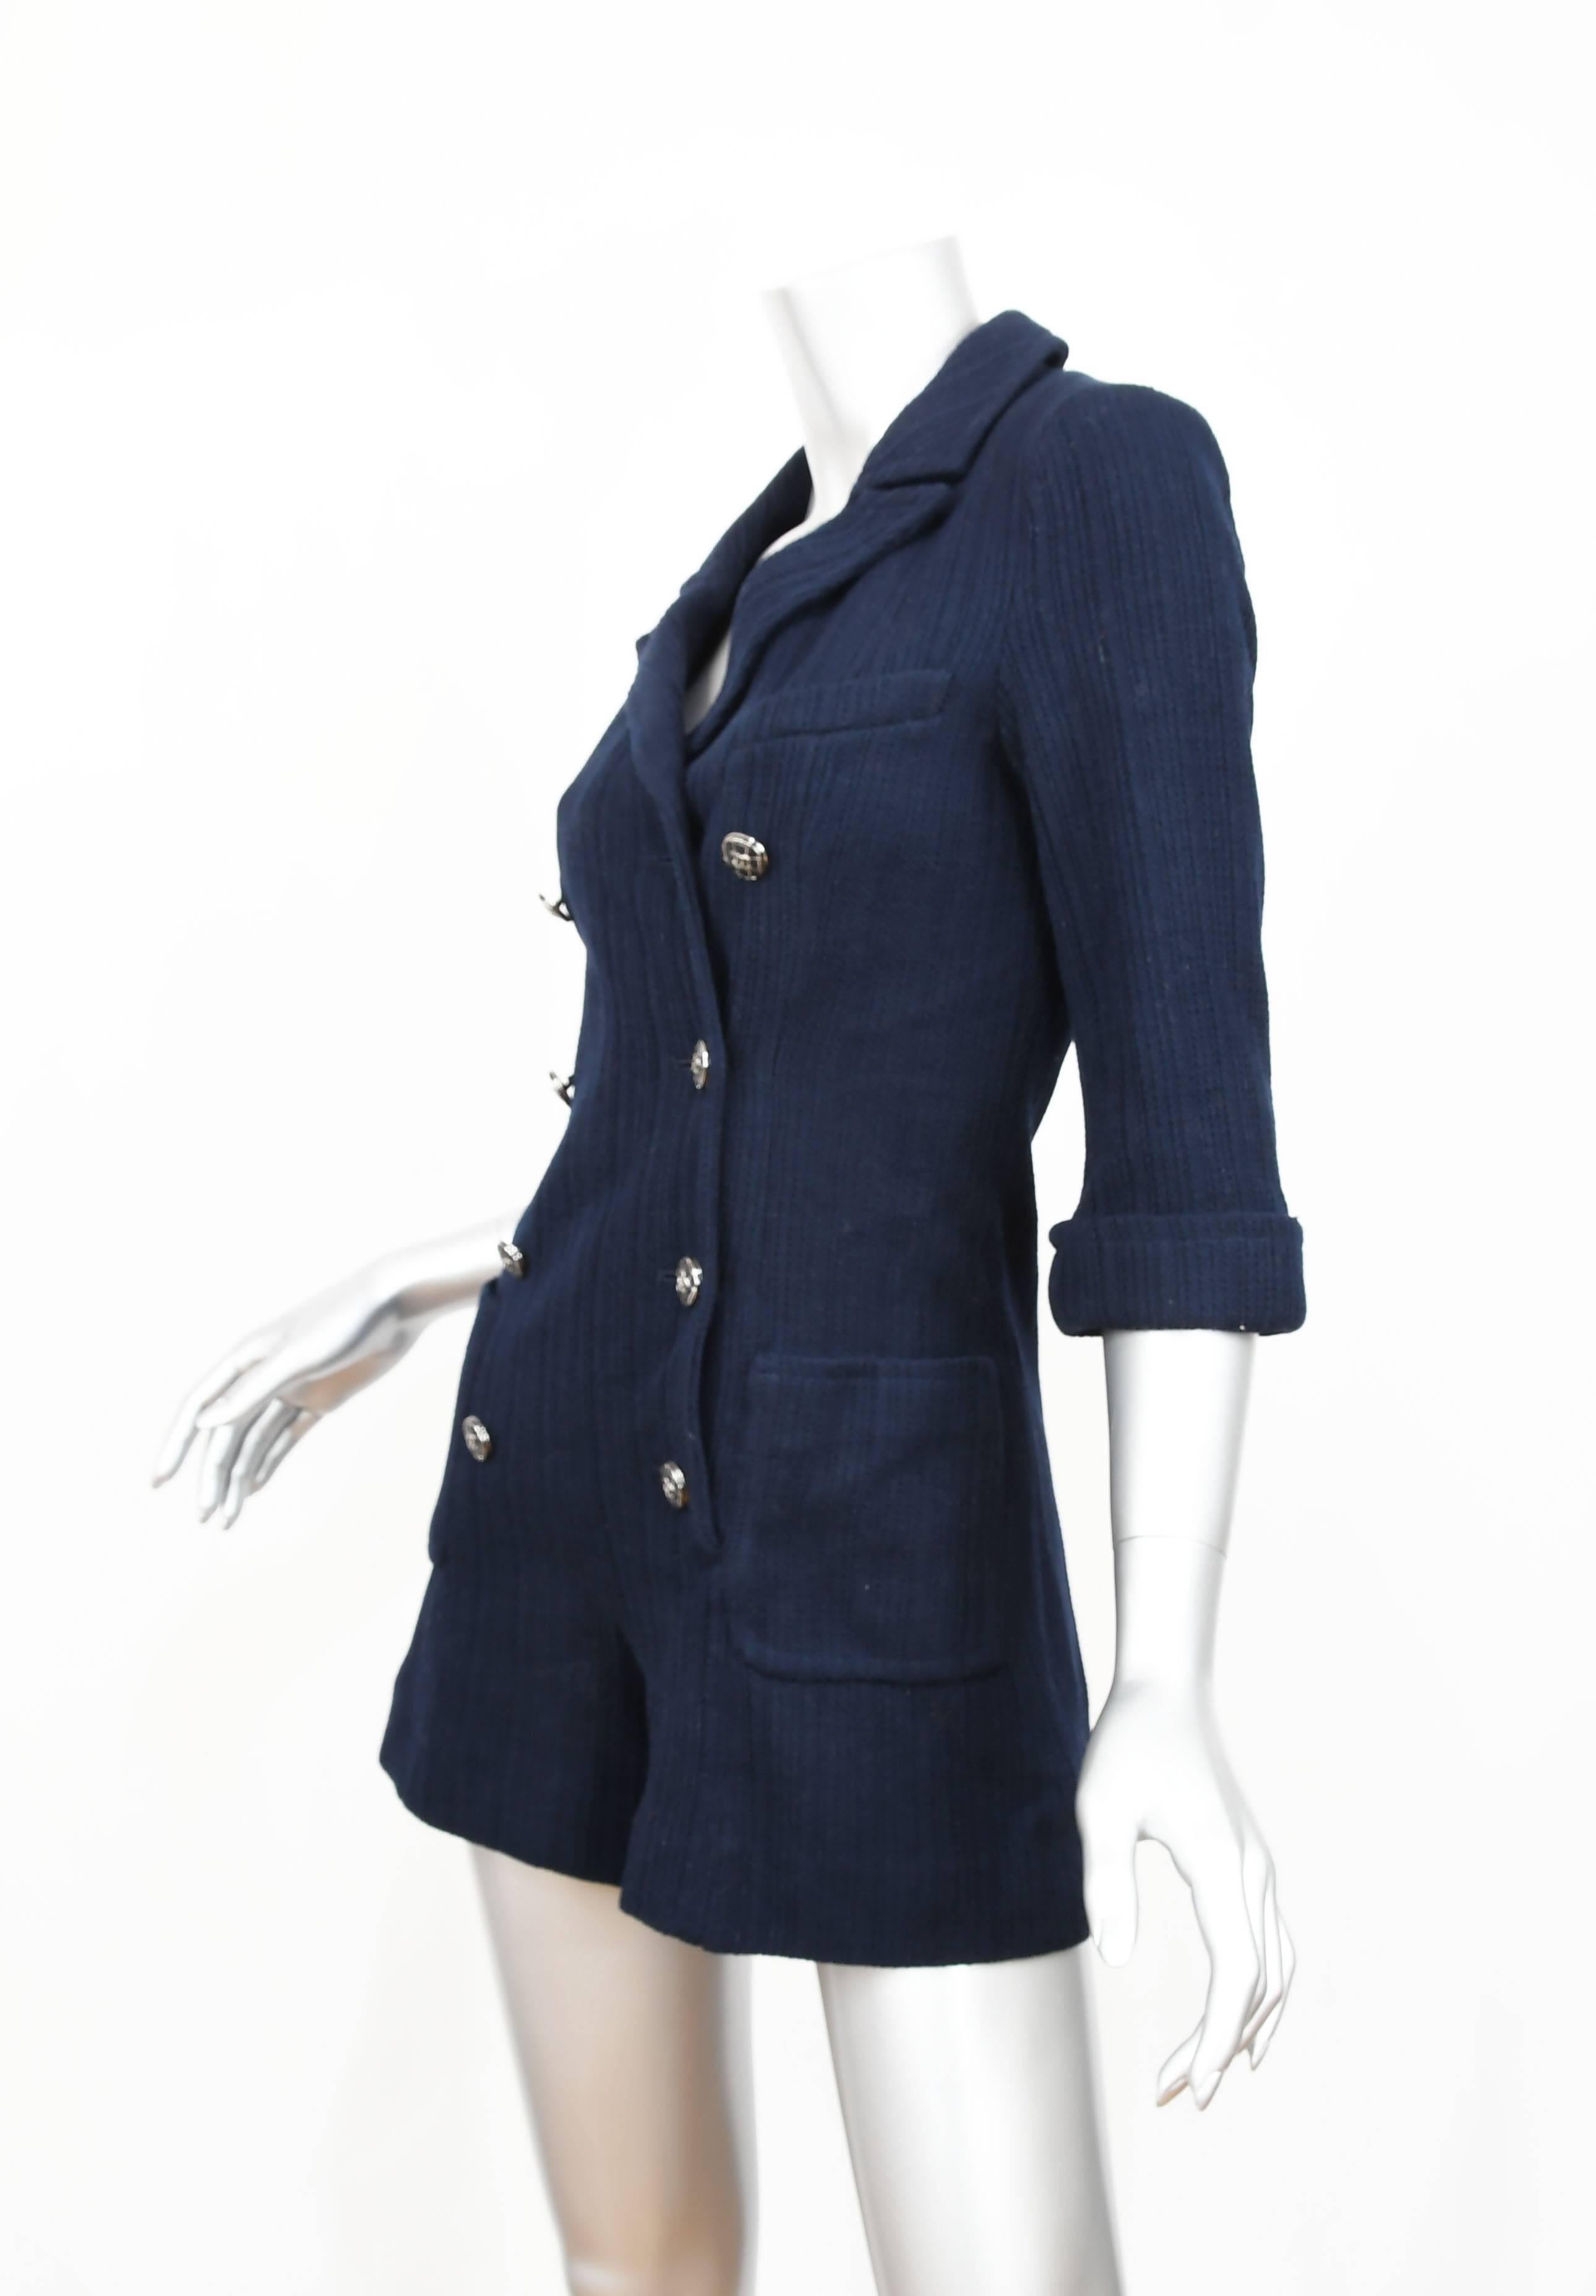 Chanel Navy cotton chic double breasted romper with 3/4 length sleeves.  This one-piece romper is ideal for Resort or Spring/Summer.  It is equally exciting to wear on the beach or having lunch at poolside.  The look is sophisticated with notched